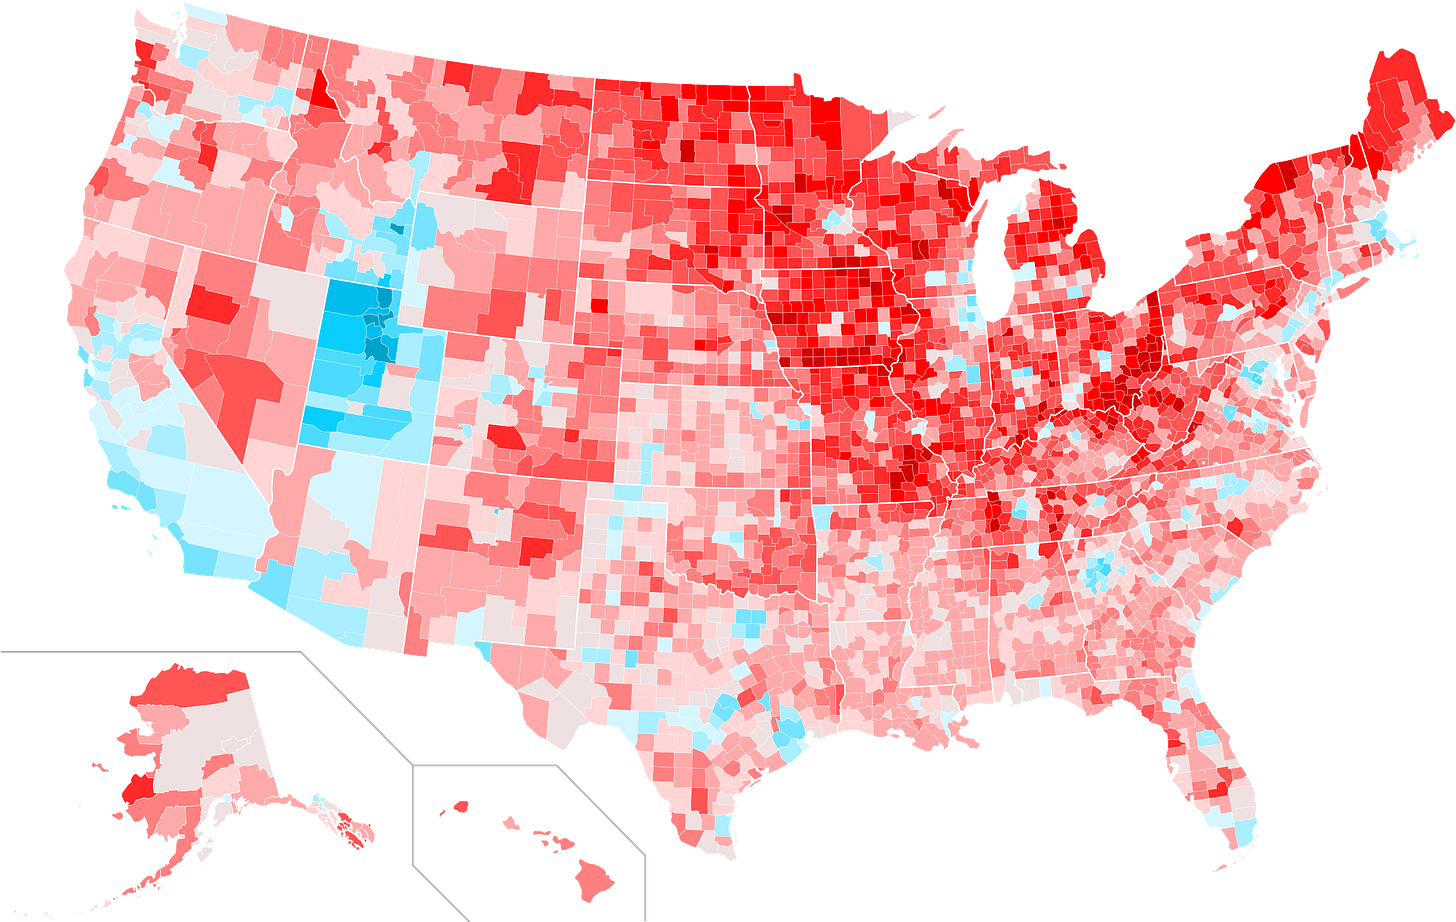 County swing from 2012 to 2016